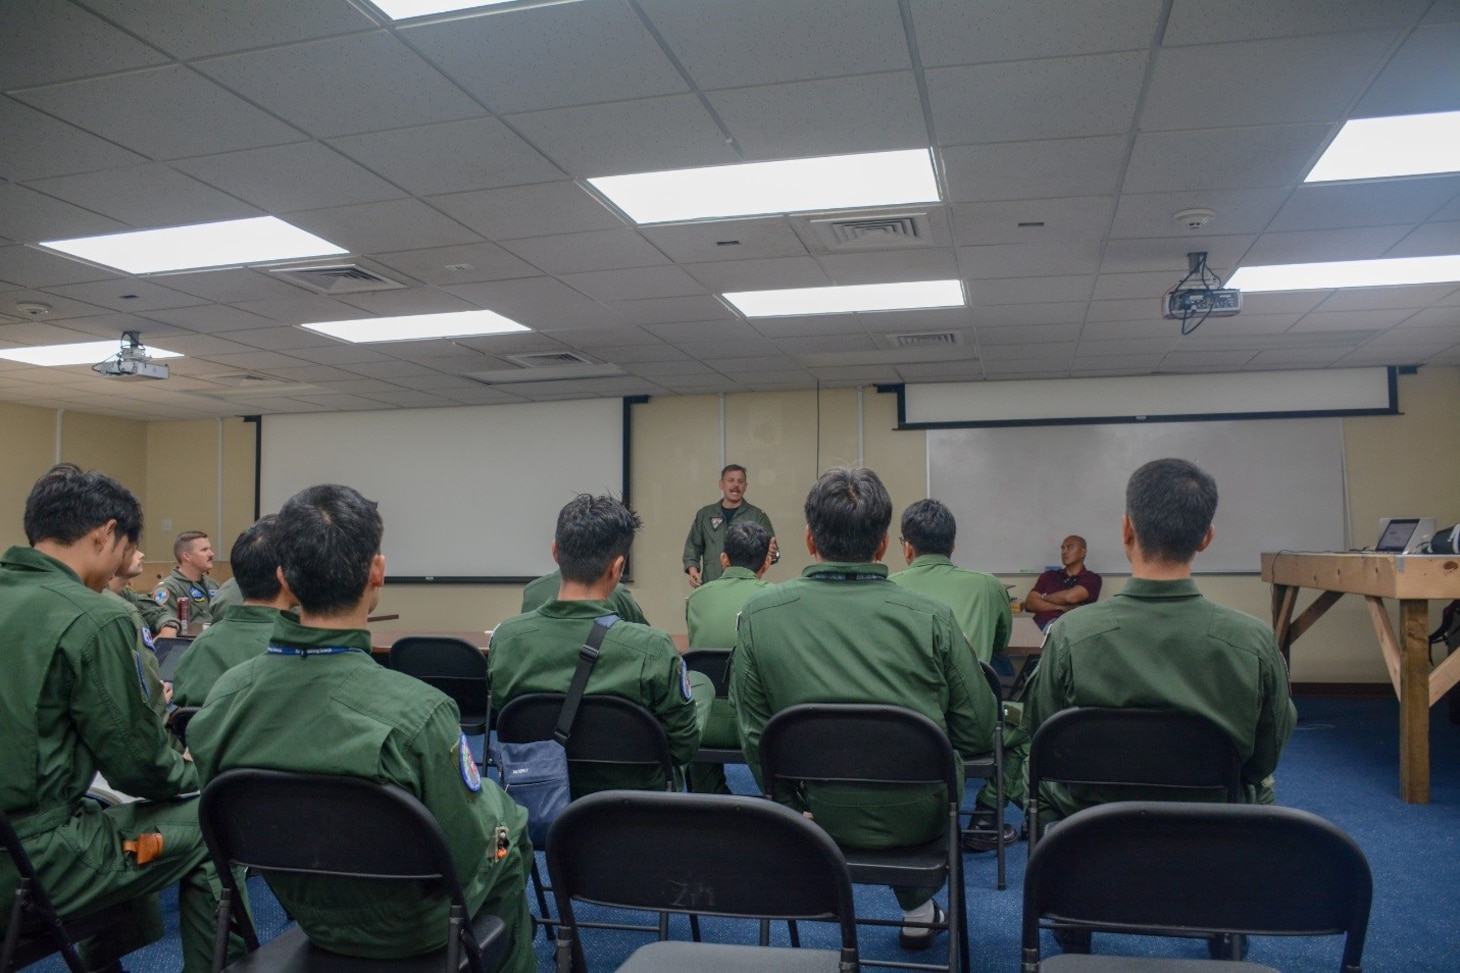 ANDERSEN AIR FORCE BASE, Guam (Jan. 28, 2020) - Service members from the U.S Navy, Japan Maritime Self Defense Force (JMSDF), the Republic of Korea Navy (ROKN) and the Royal New Zealand Navy (RNZN) attend a mission planning brief for operation Sea Dragon, Jan. 28. Sea Dragon is a multi-lateral anti-submarine warfare exercise that improves the interoperability elements required to effectively and cohesively respond to the defense of a regional contingency in the Indo- Pacific, while continuing to build and strengthen relationships held between nations.